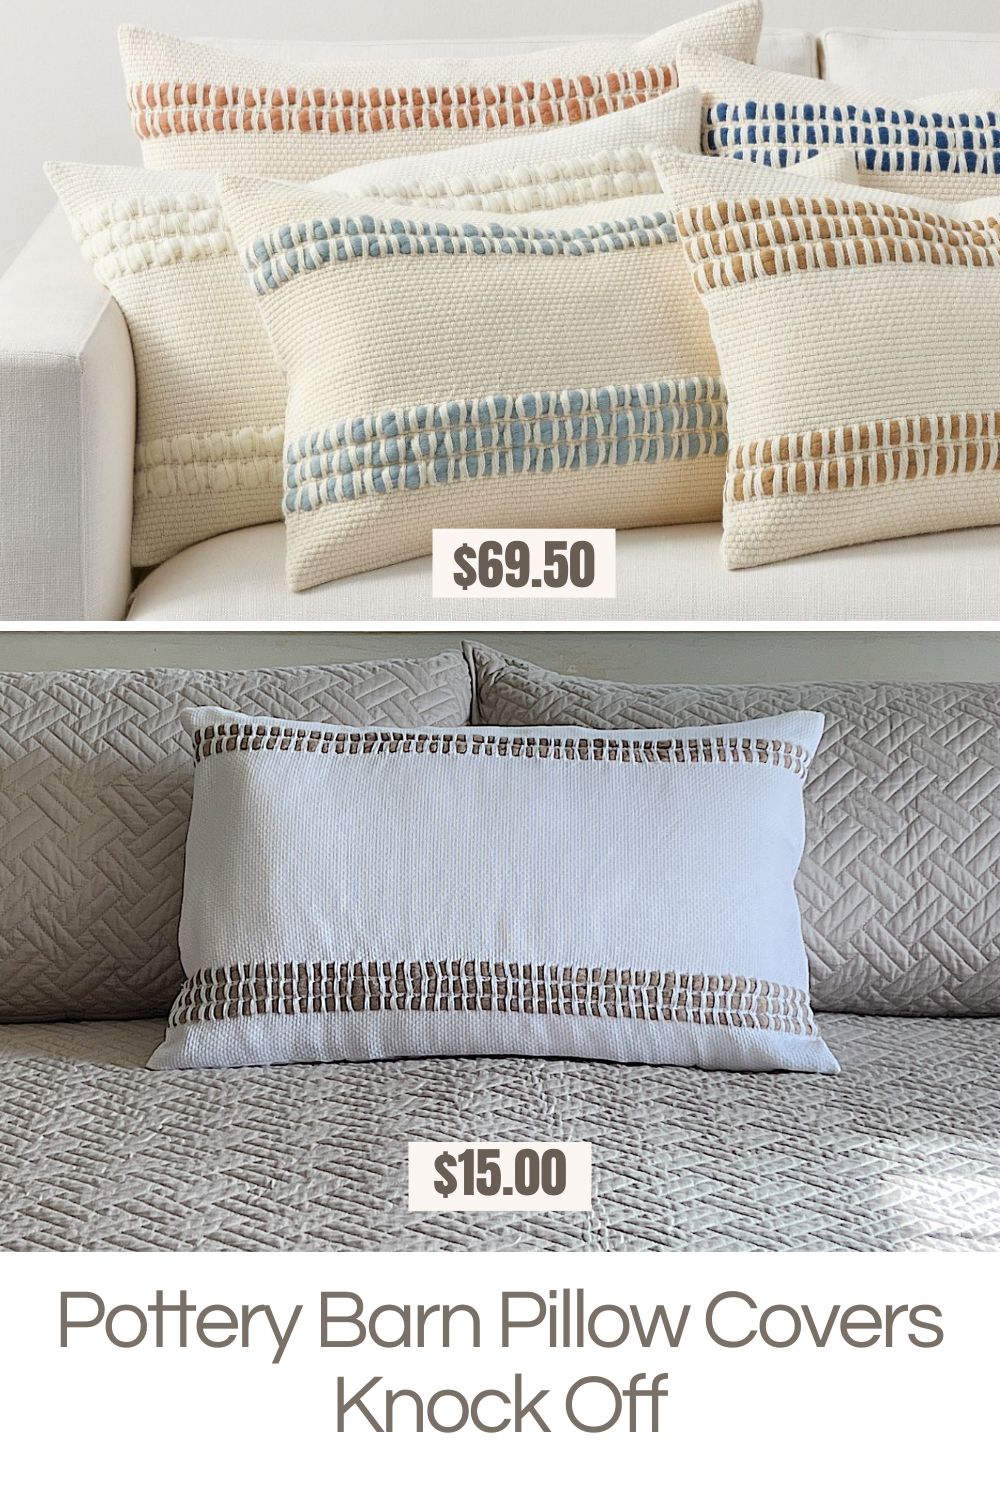 I love everything that Pottery Barn sells, except for their prices. Today I am sharing this amazing Pottery Barn Pillow Covers knock-off!